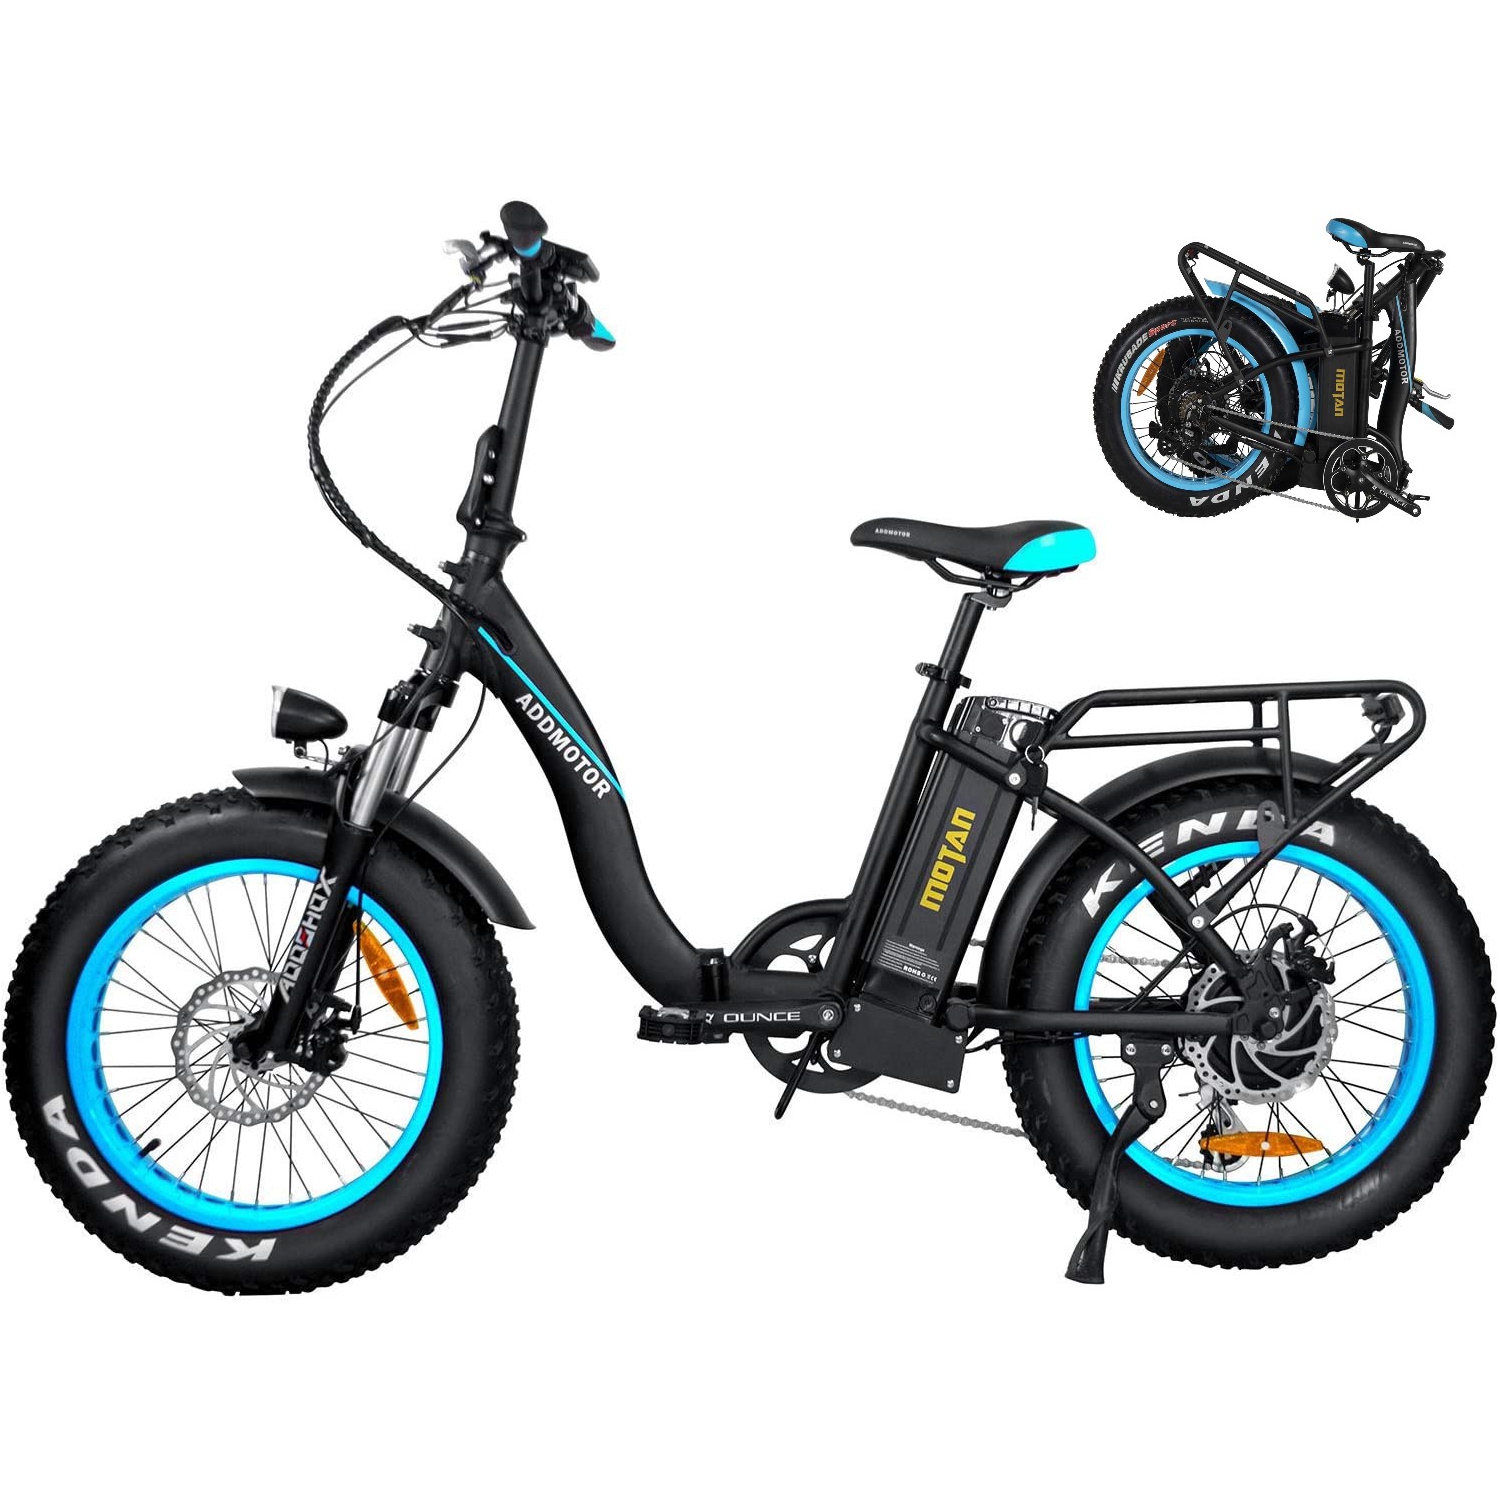 Addmotor M-140 P7 48V 16Ah 750W Electric Folding Bike, 20" Fat Tires E-Ride Adult Step-Thru Commuter City Foldable E-bike Bicycles with Lithium Battery with Large Capacity, Blue